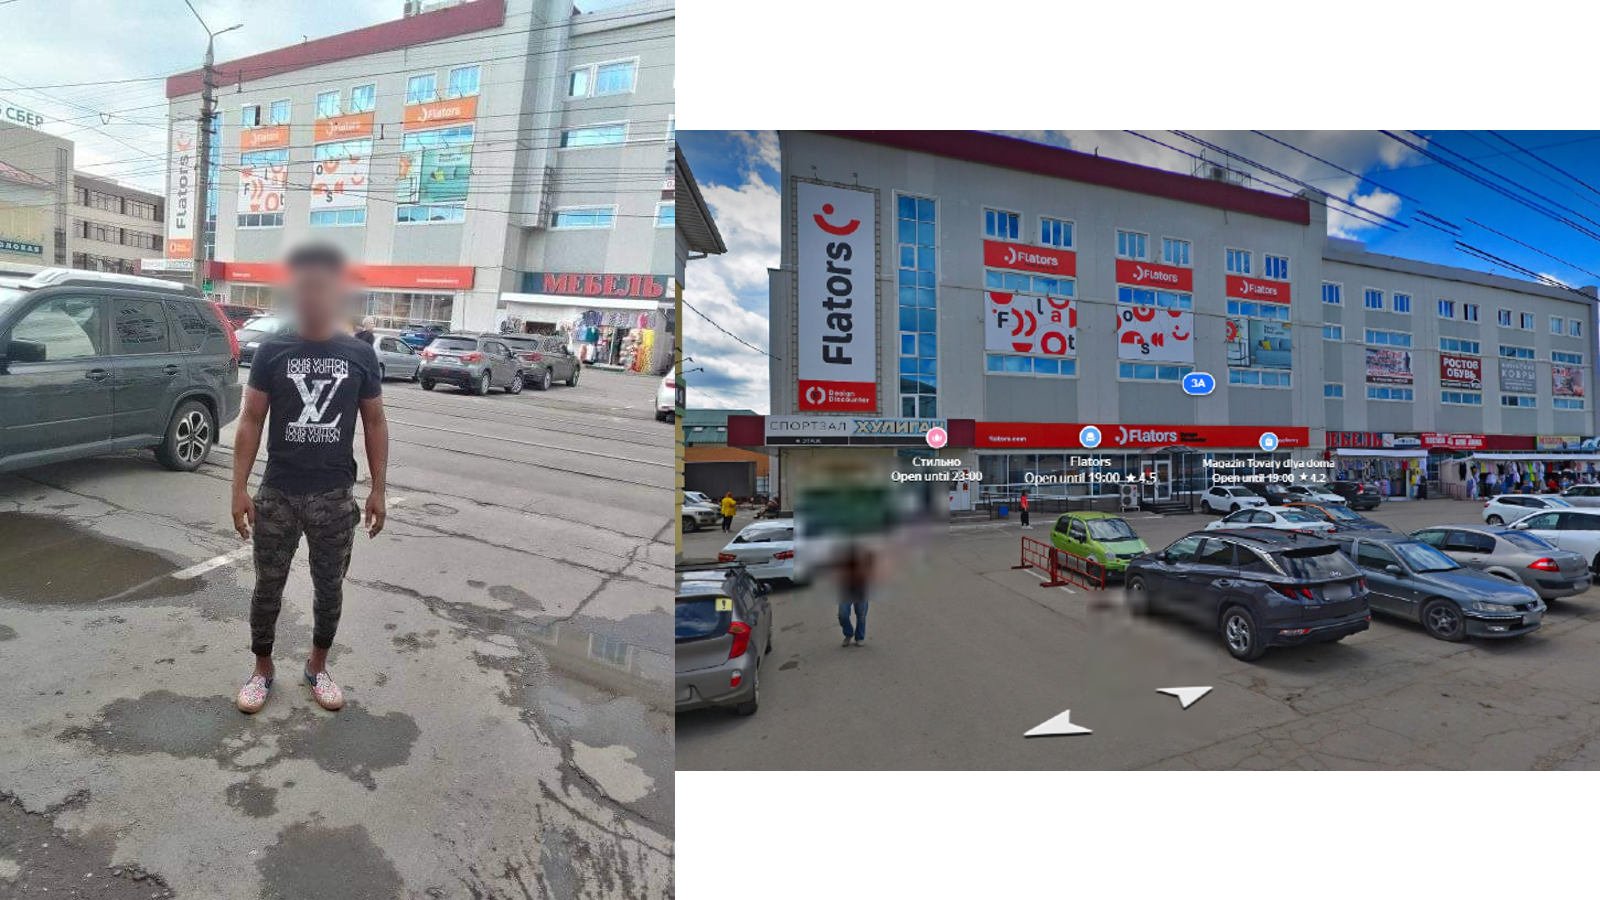 The image on the left was posted on Facebook on July 18 by one of the Cubans identified by the pro-Ukrainian hackers. Our team geolocated the photo and determined that it was taken in the street where the military recruitment centre is located in Toula.